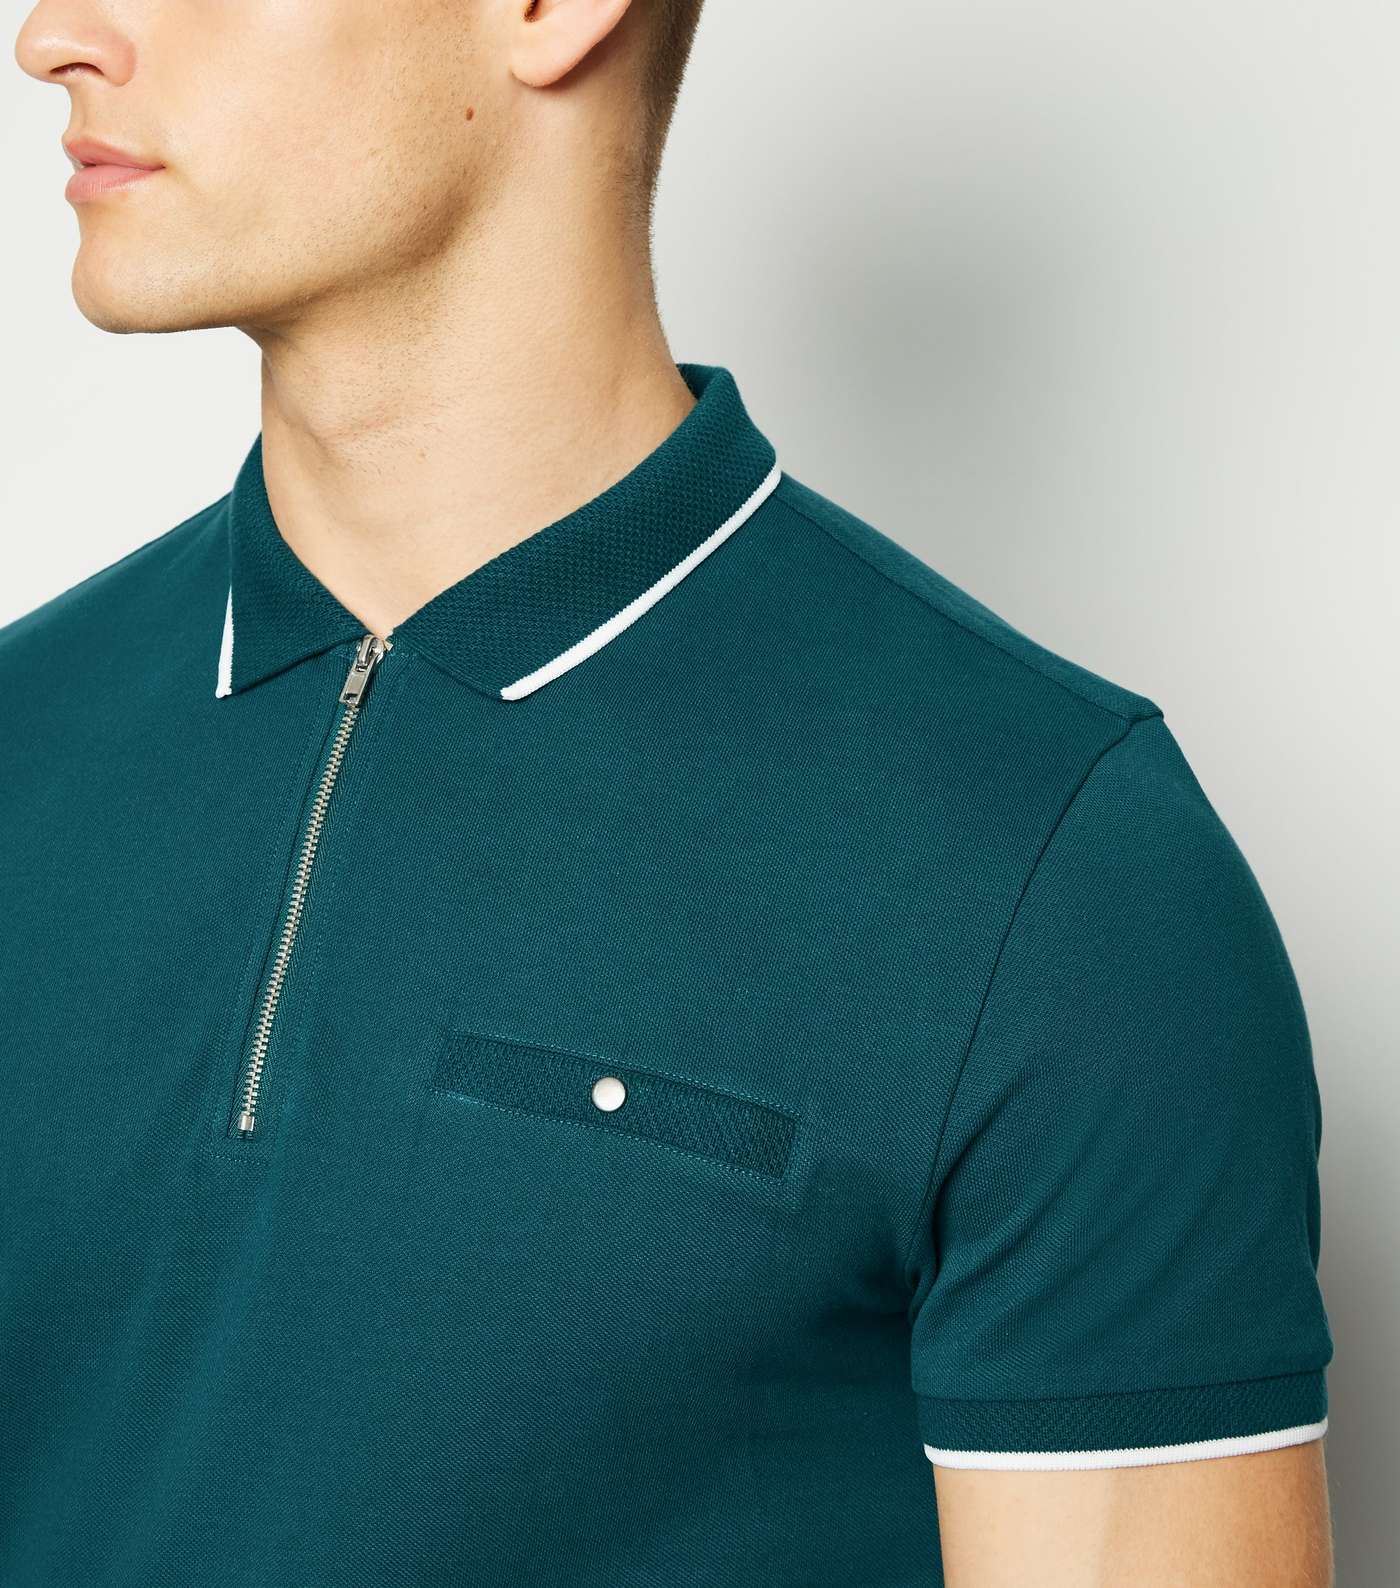 Teal Tipped Zip Front Polo Shirt Image 5